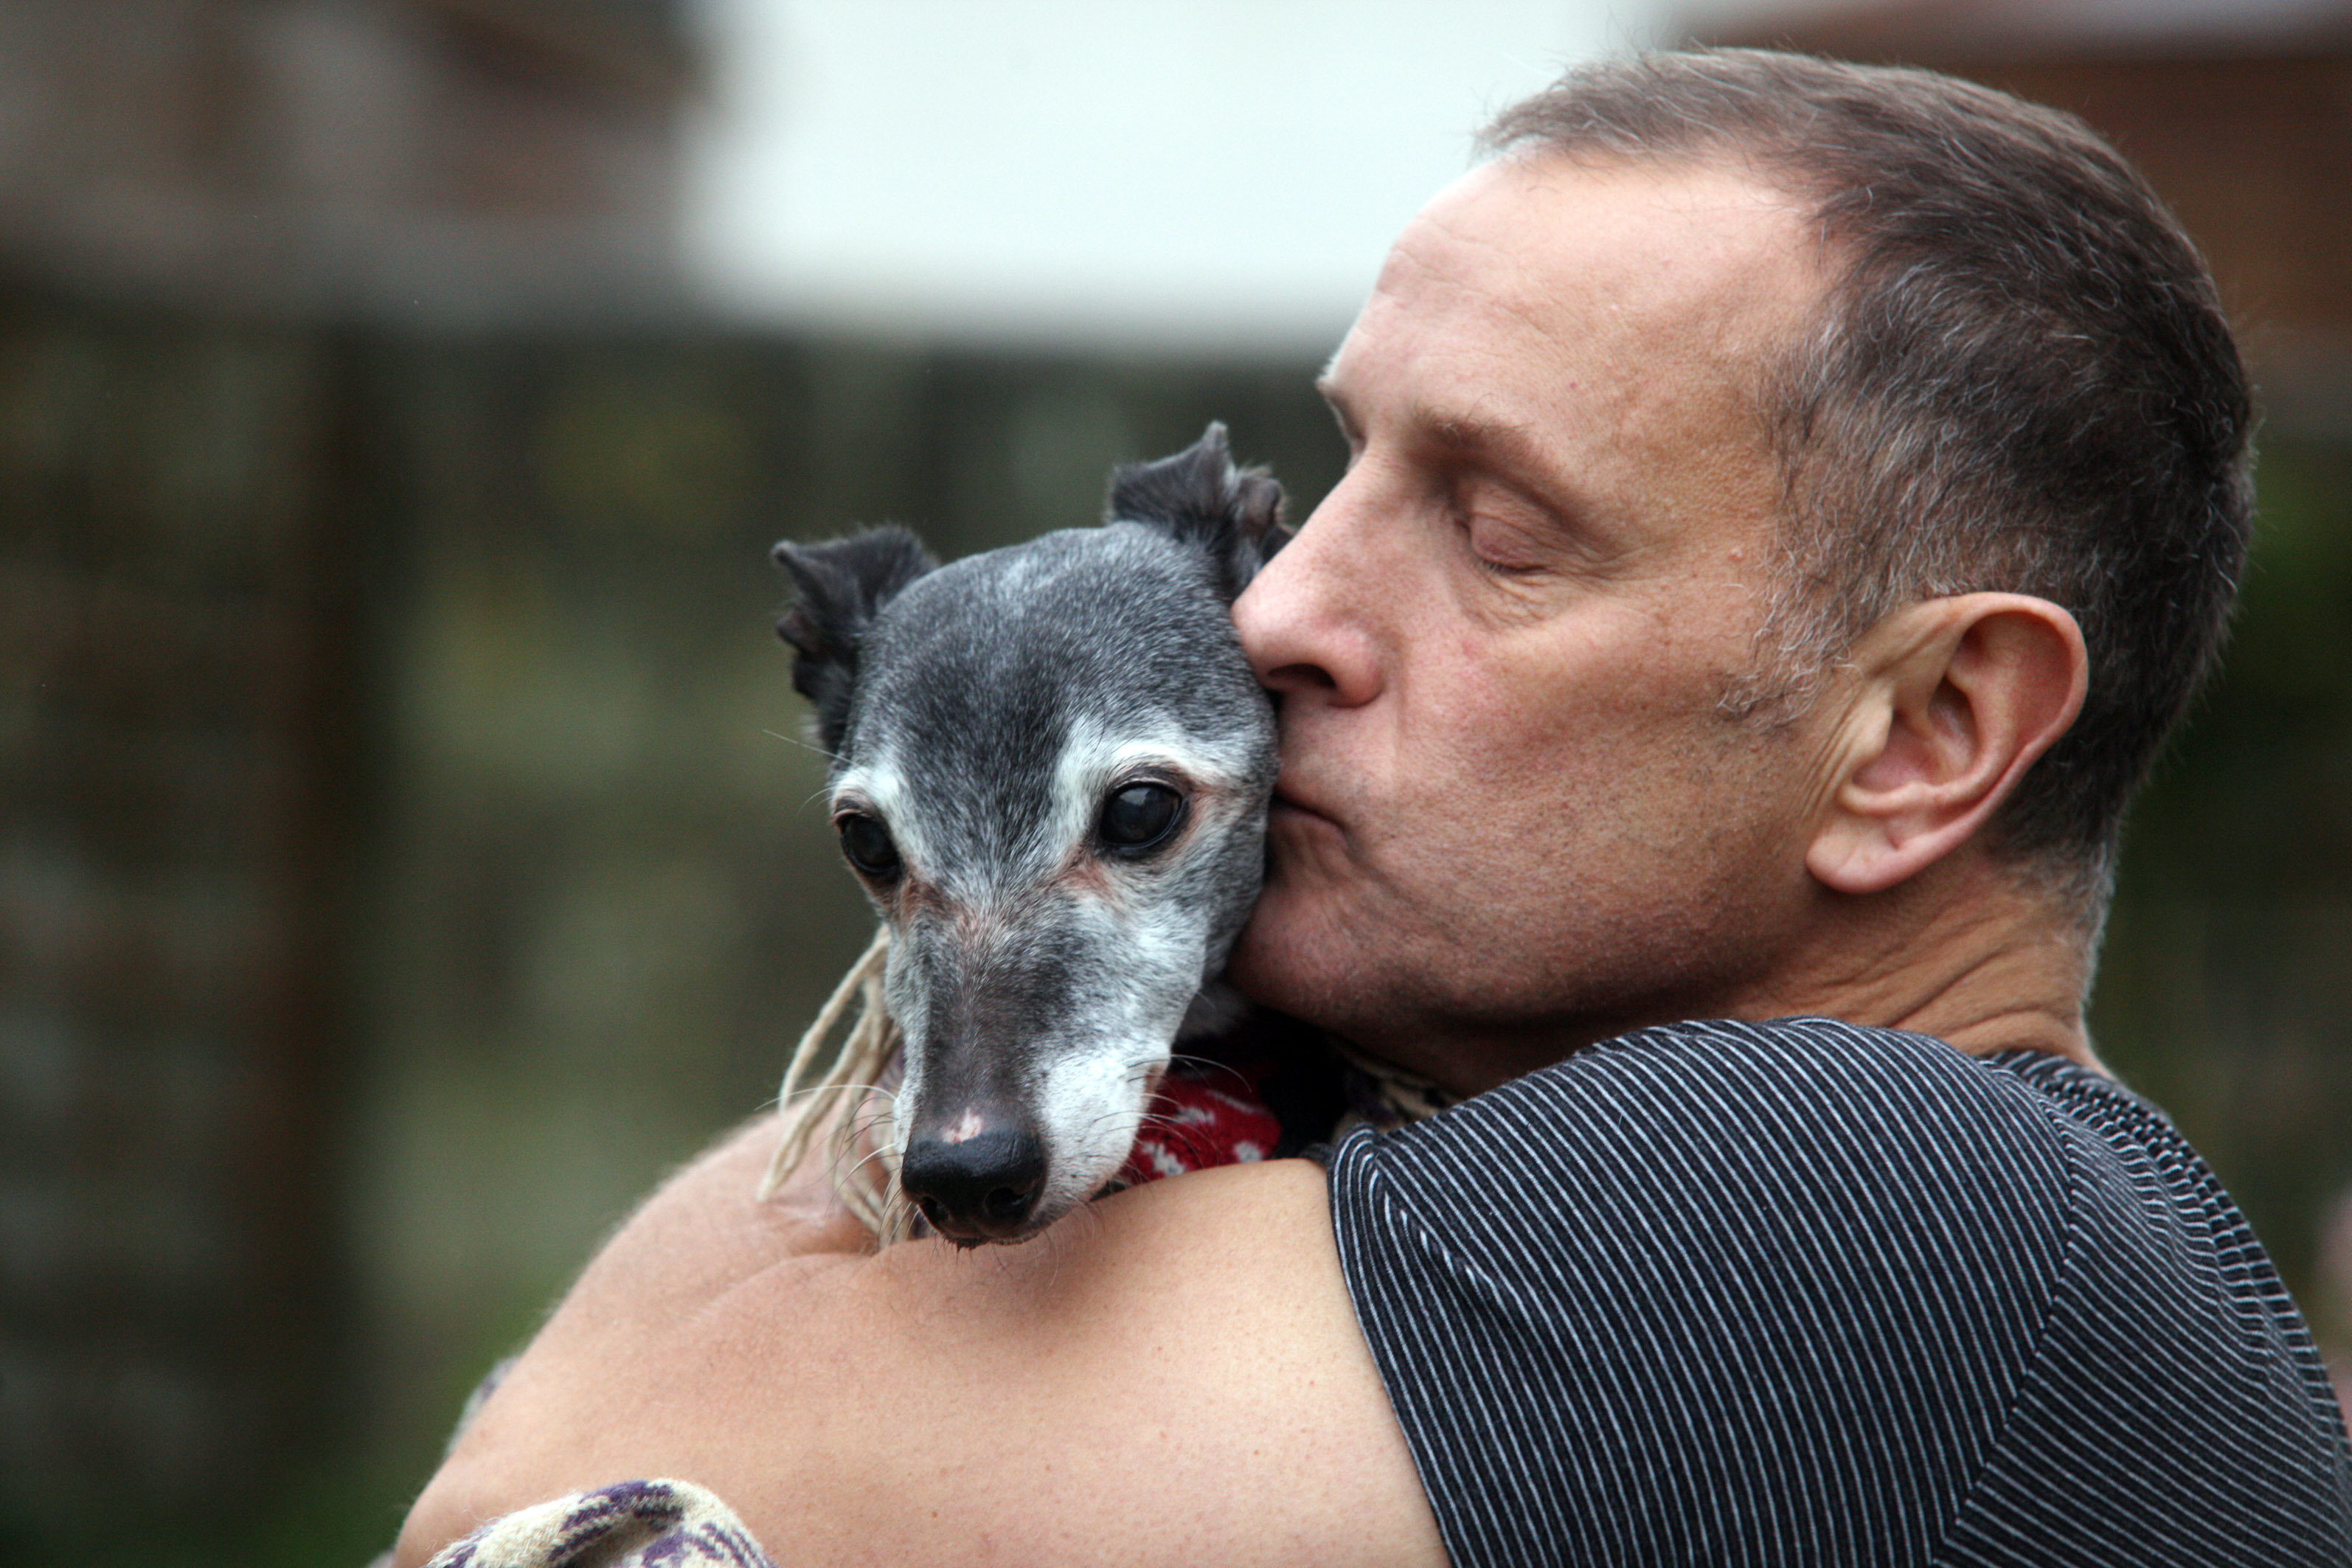 Mark Woods kisses his dog Walnut before taking him to Porth beach for a final walk (SWNS / Neil Hope)